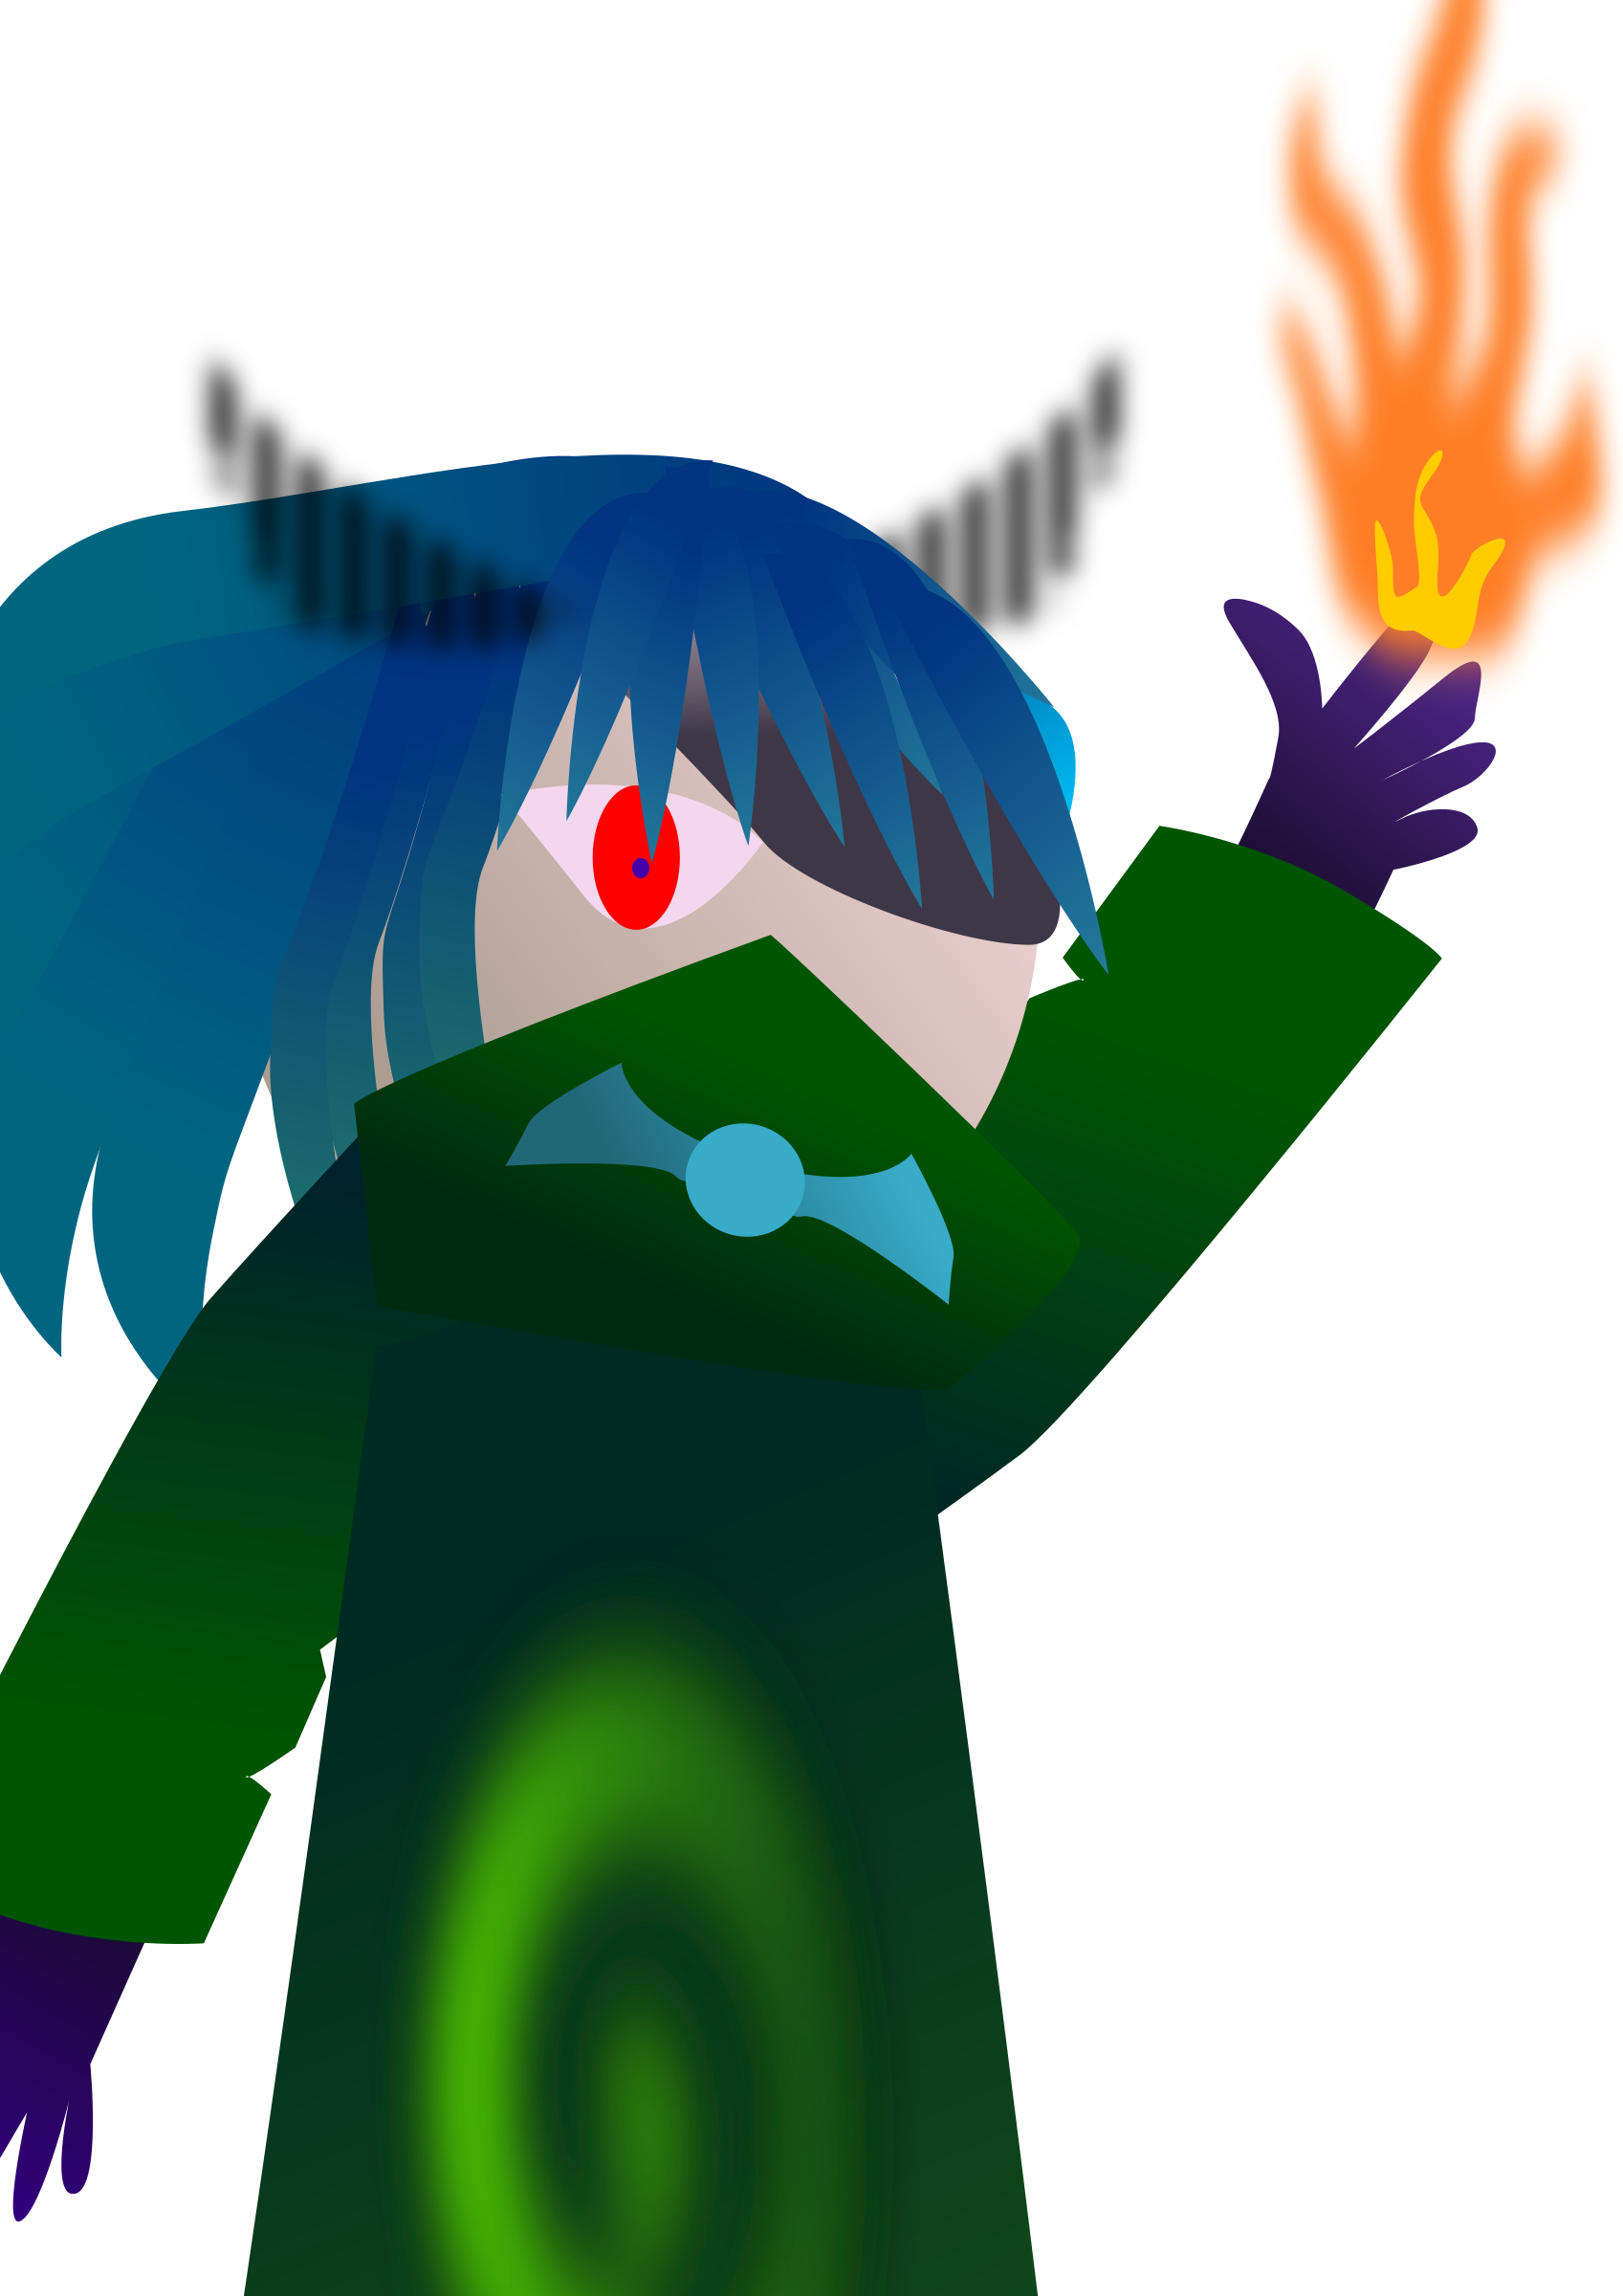 clipart flames character